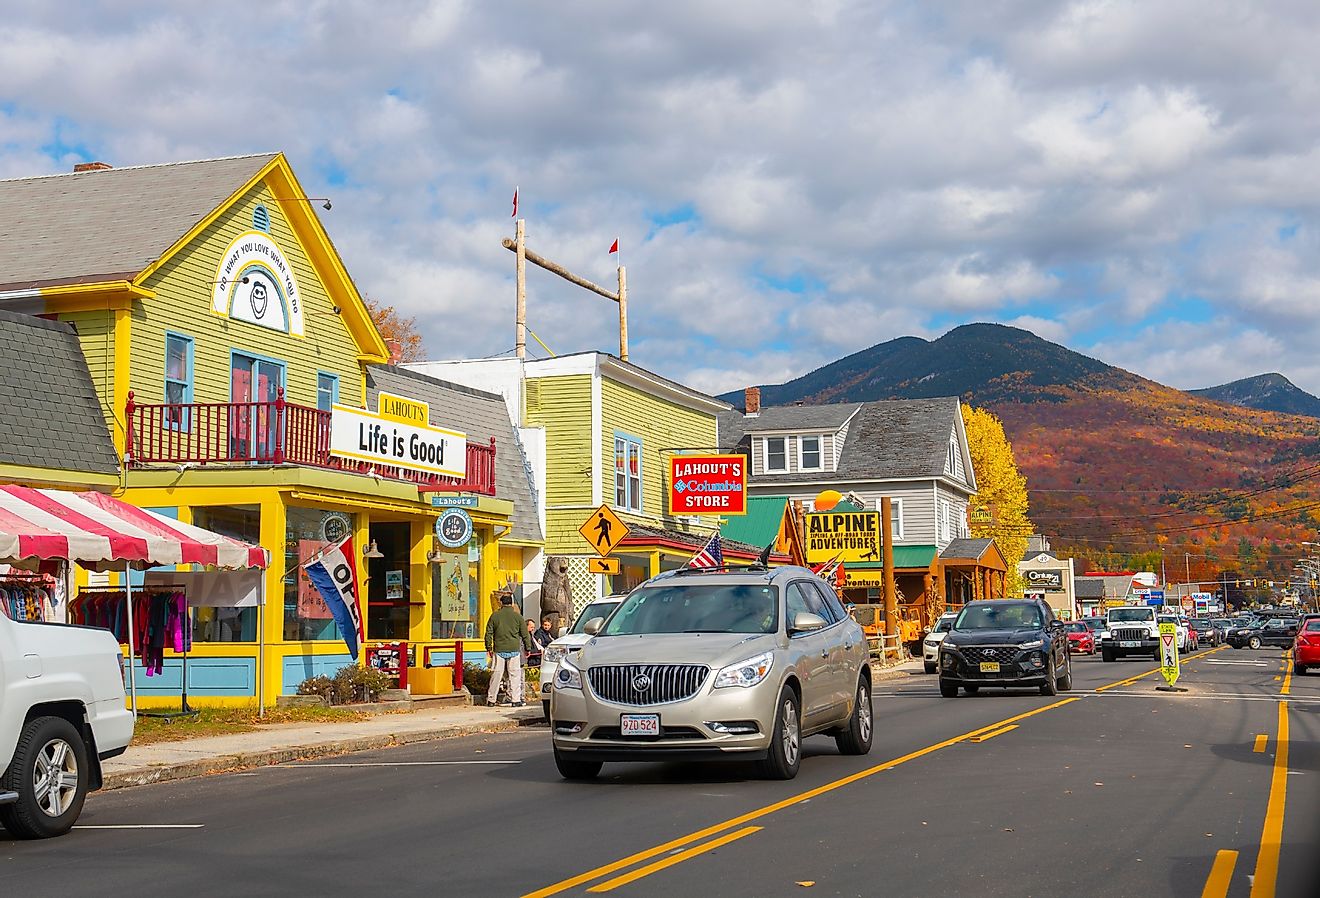 Town center and Little Coolidge Mountain on Kancamagus Highway, Lincoln, New Hampshire. Image credit Wangkun Jia via Shutterstock